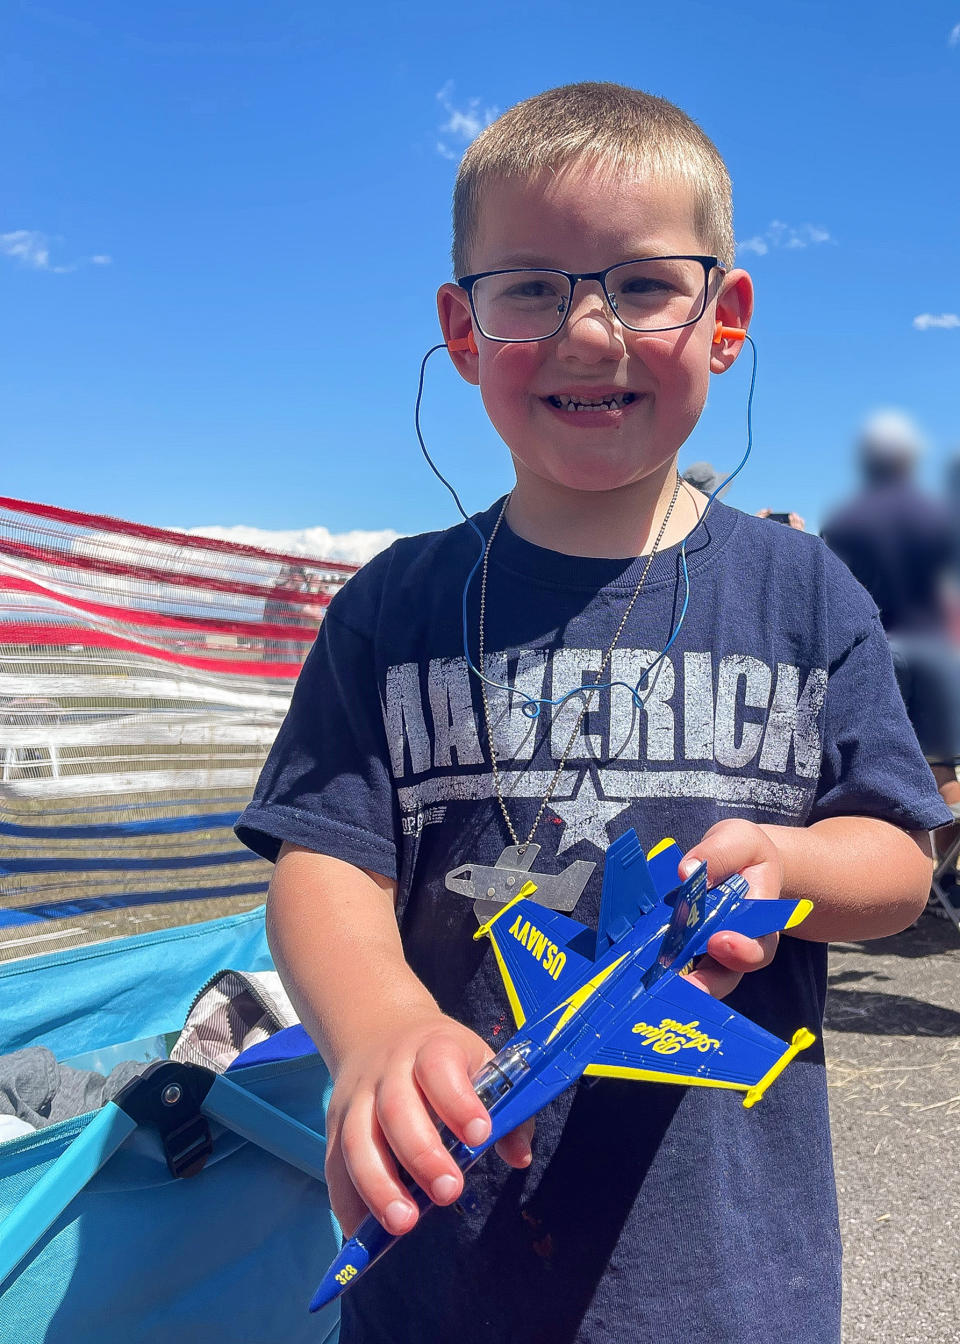 Brad Waler loves aviation and has his student pilot's license. He shared this love with his son, Maverick. (Courtesy Waler family)